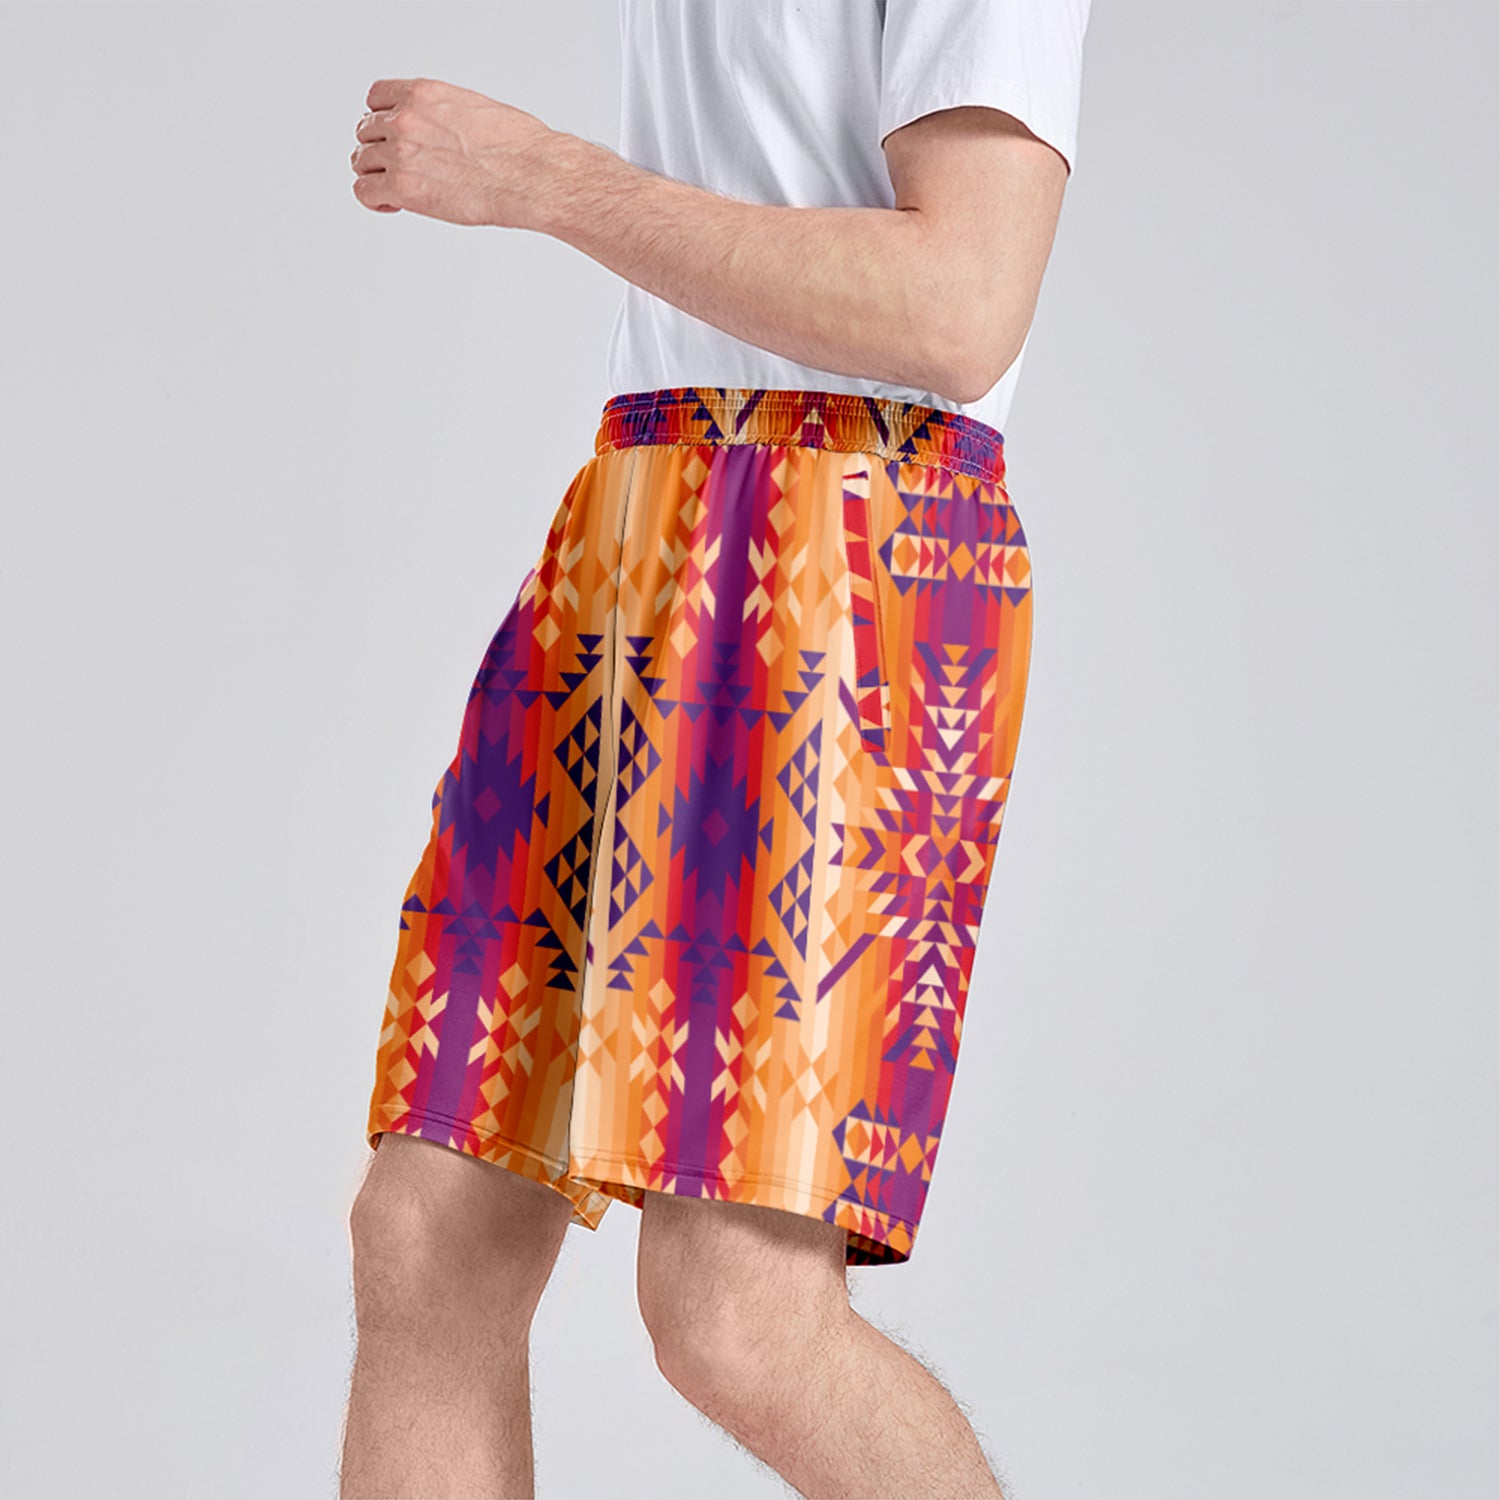 Desert Geo Athletic Shorts with Pockets